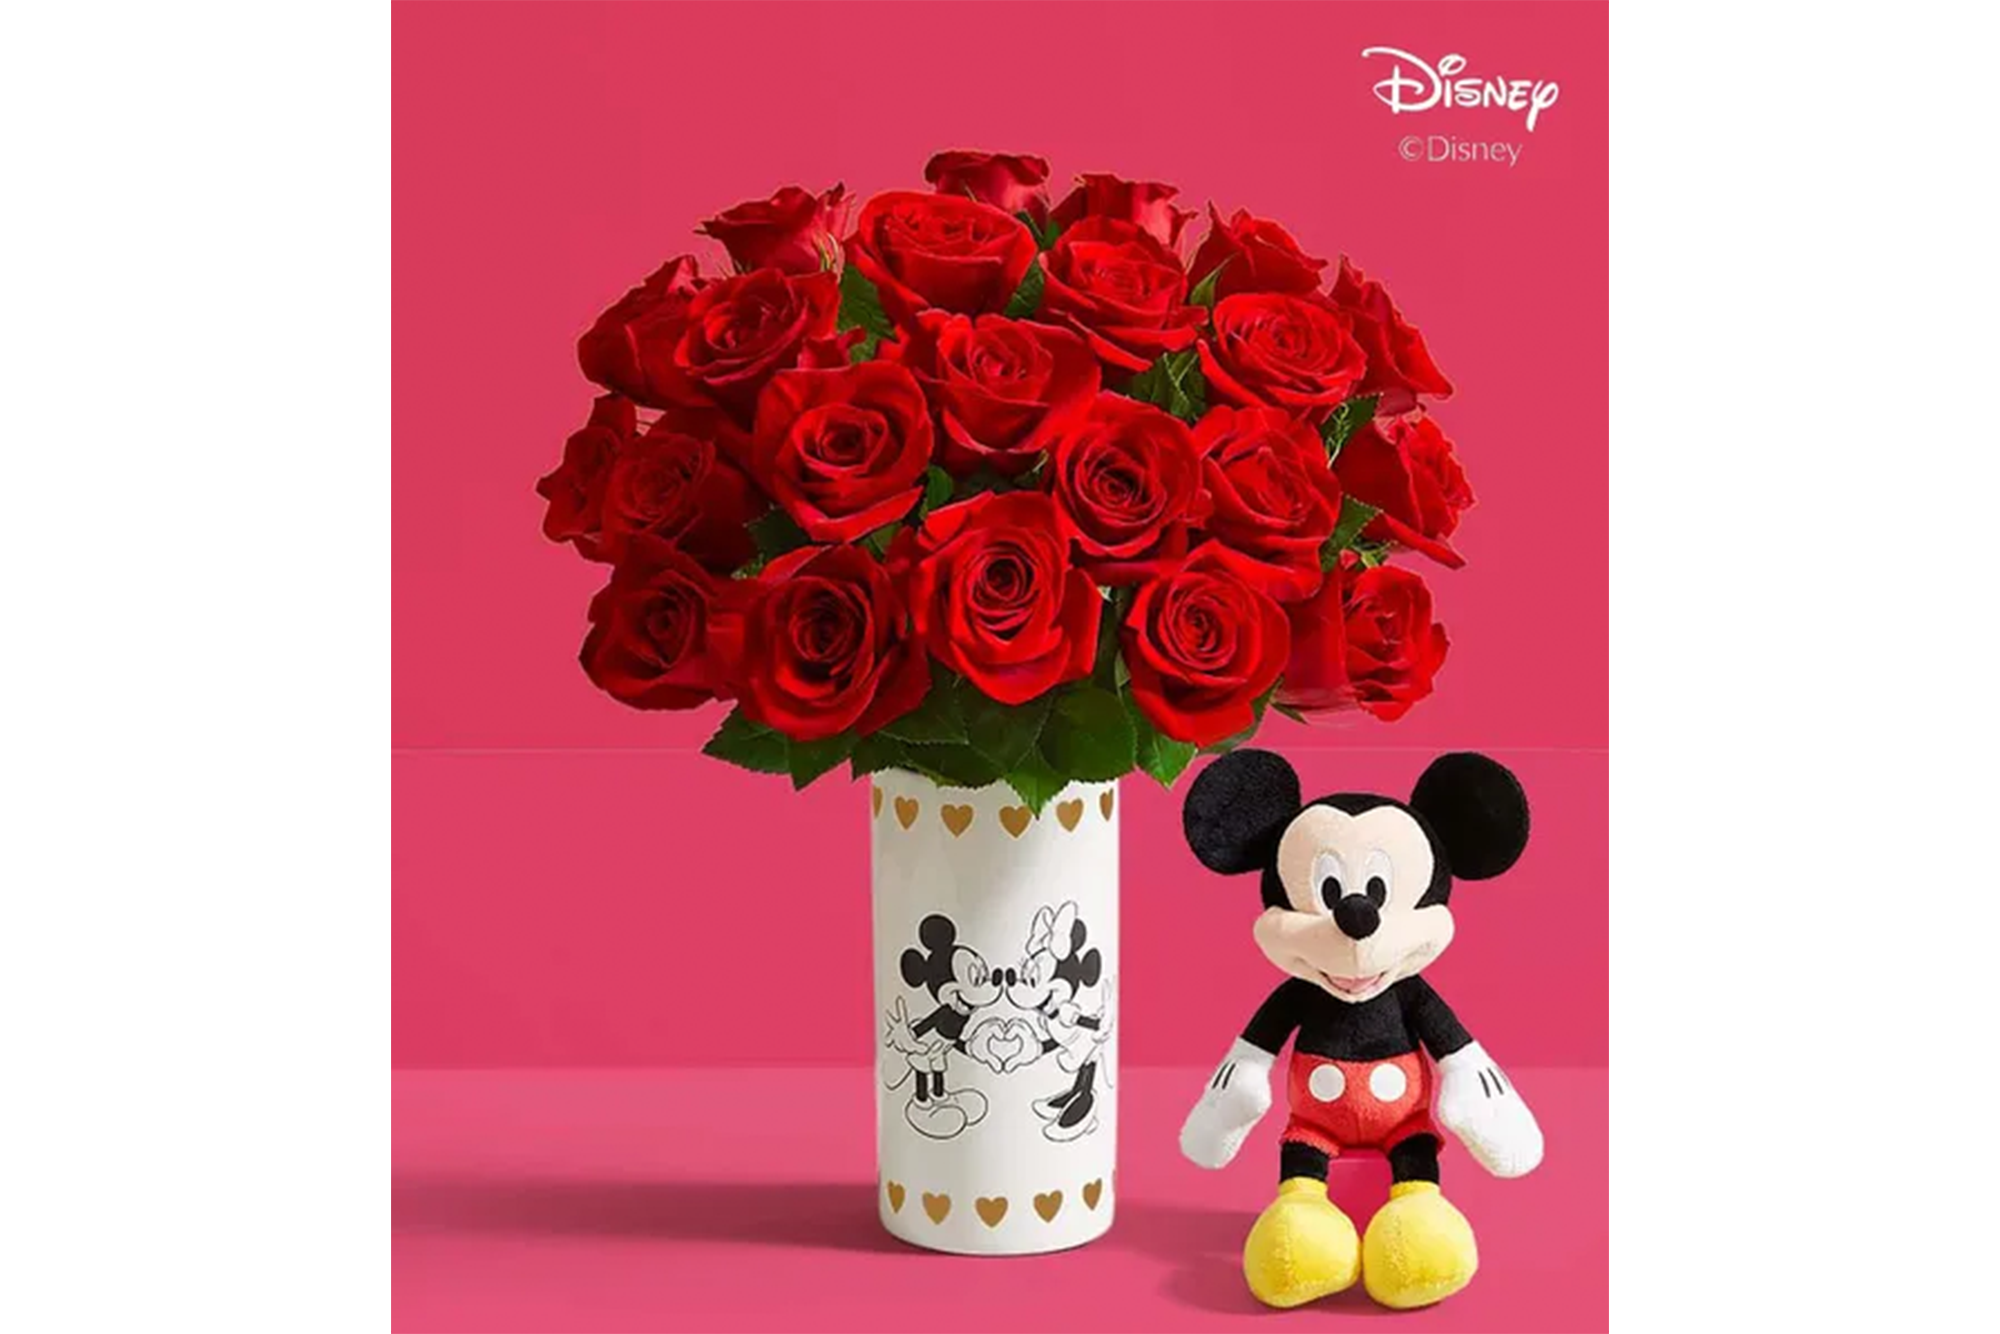 Disney Mickey Mouse & Minnie Mouse in Love Vase with Red Roses, 24 Stems